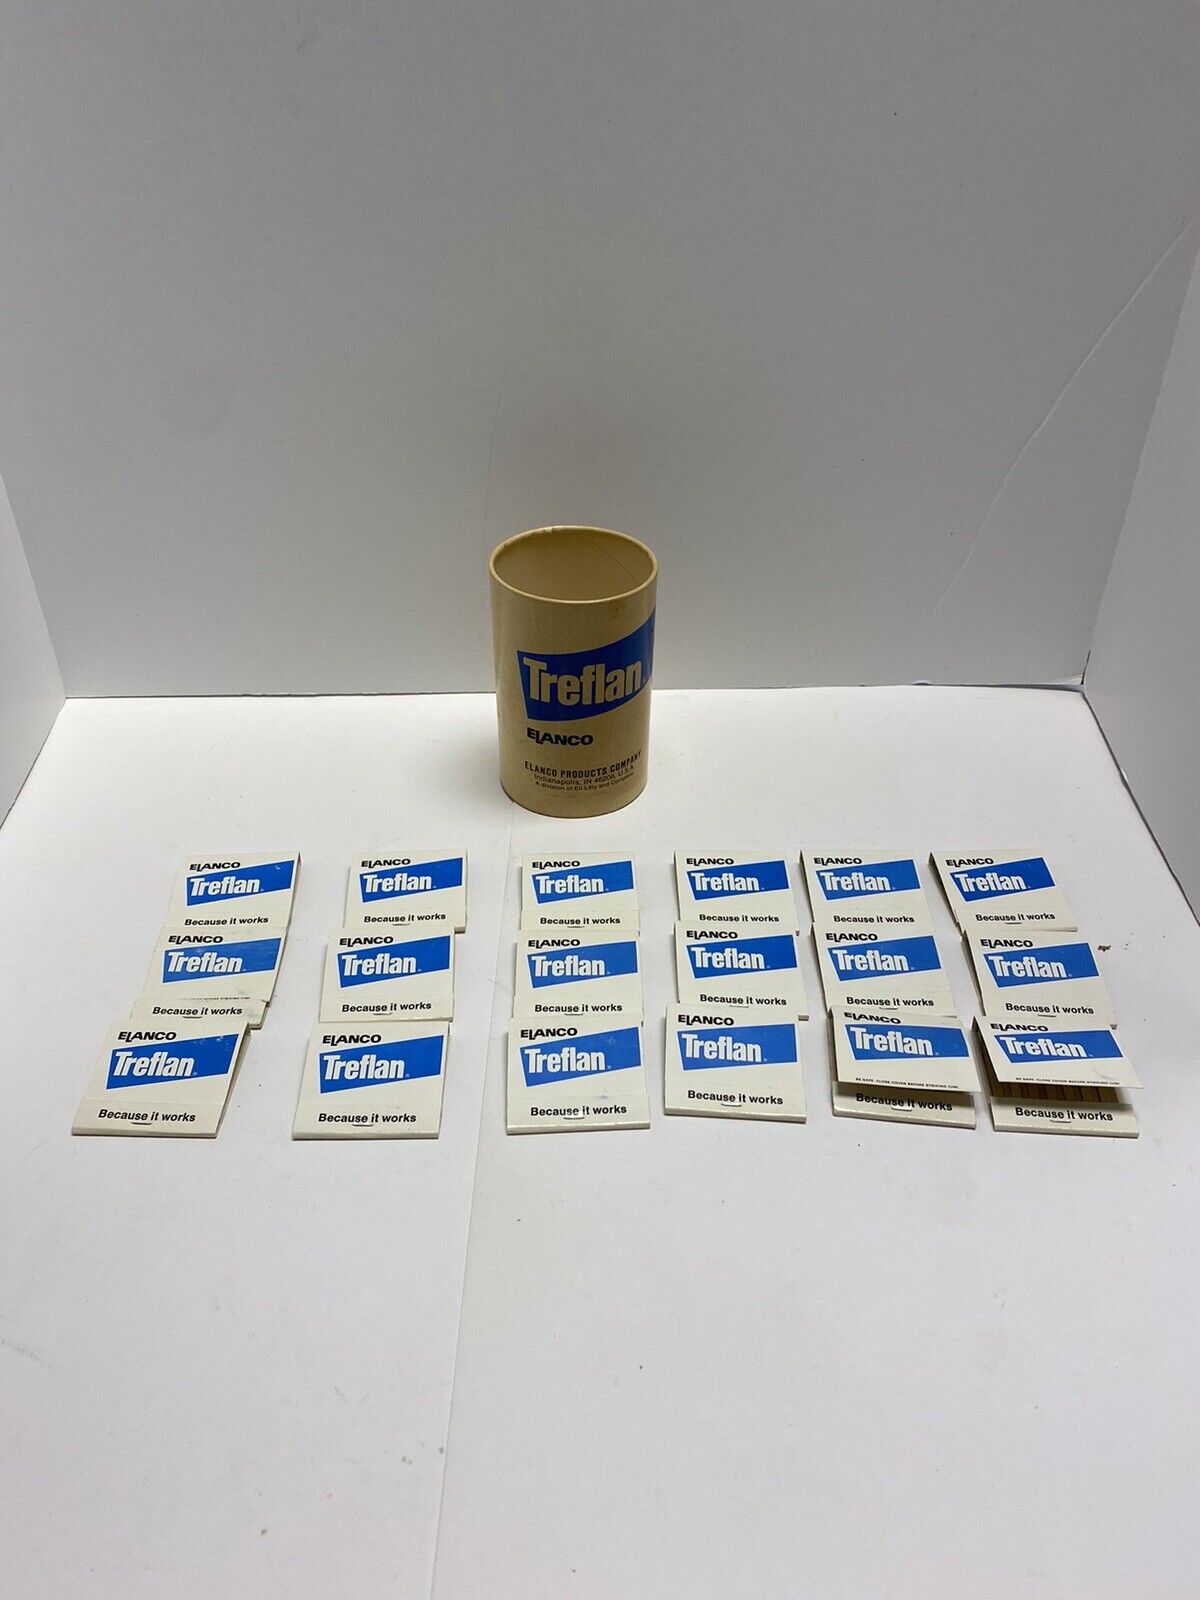 Vintage Treflan Elanco 18 matchbooks and 1 Container